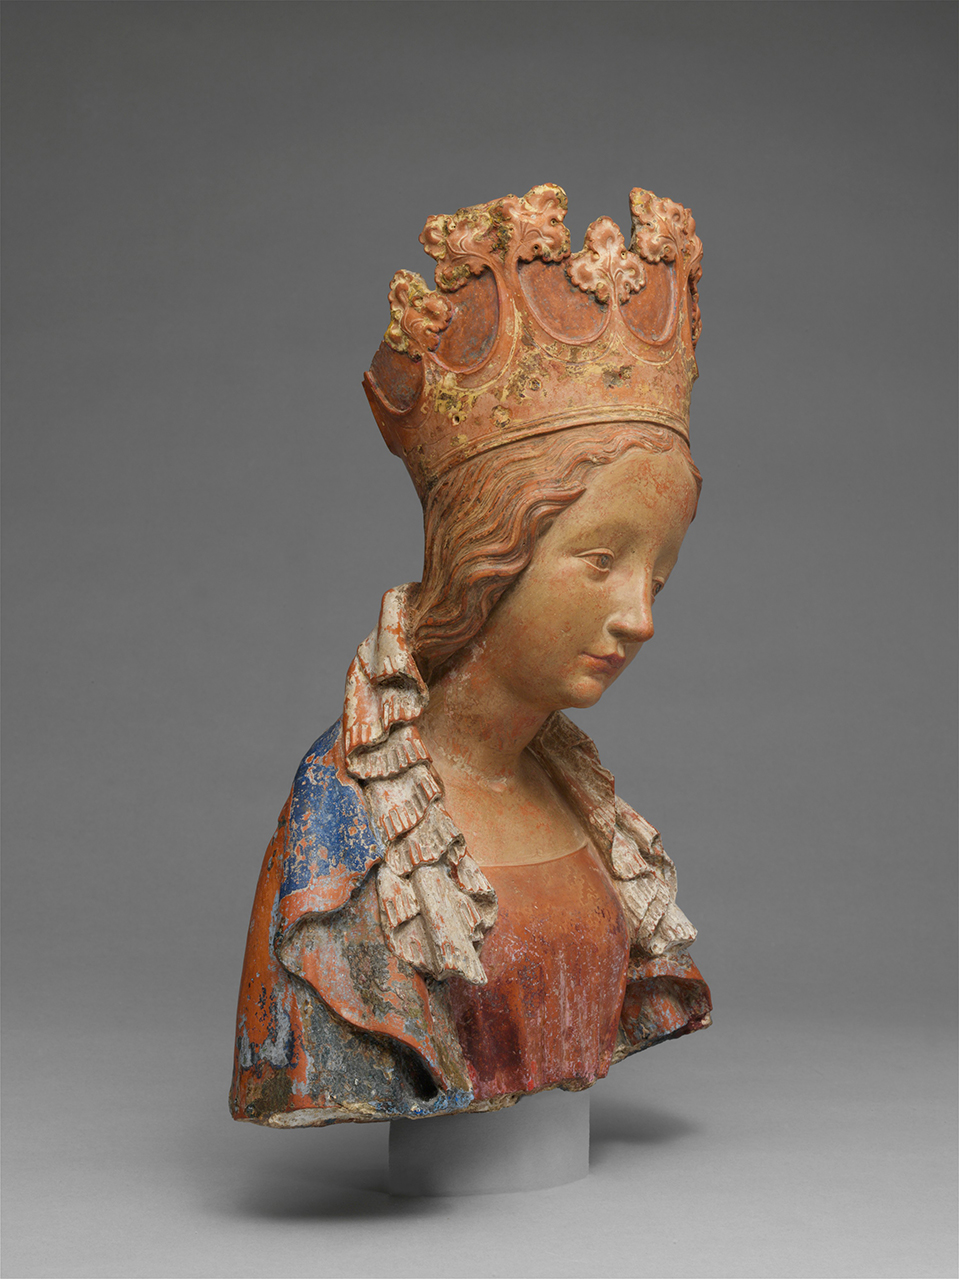 http://www.metmuseum.org/art/collection/search/476711